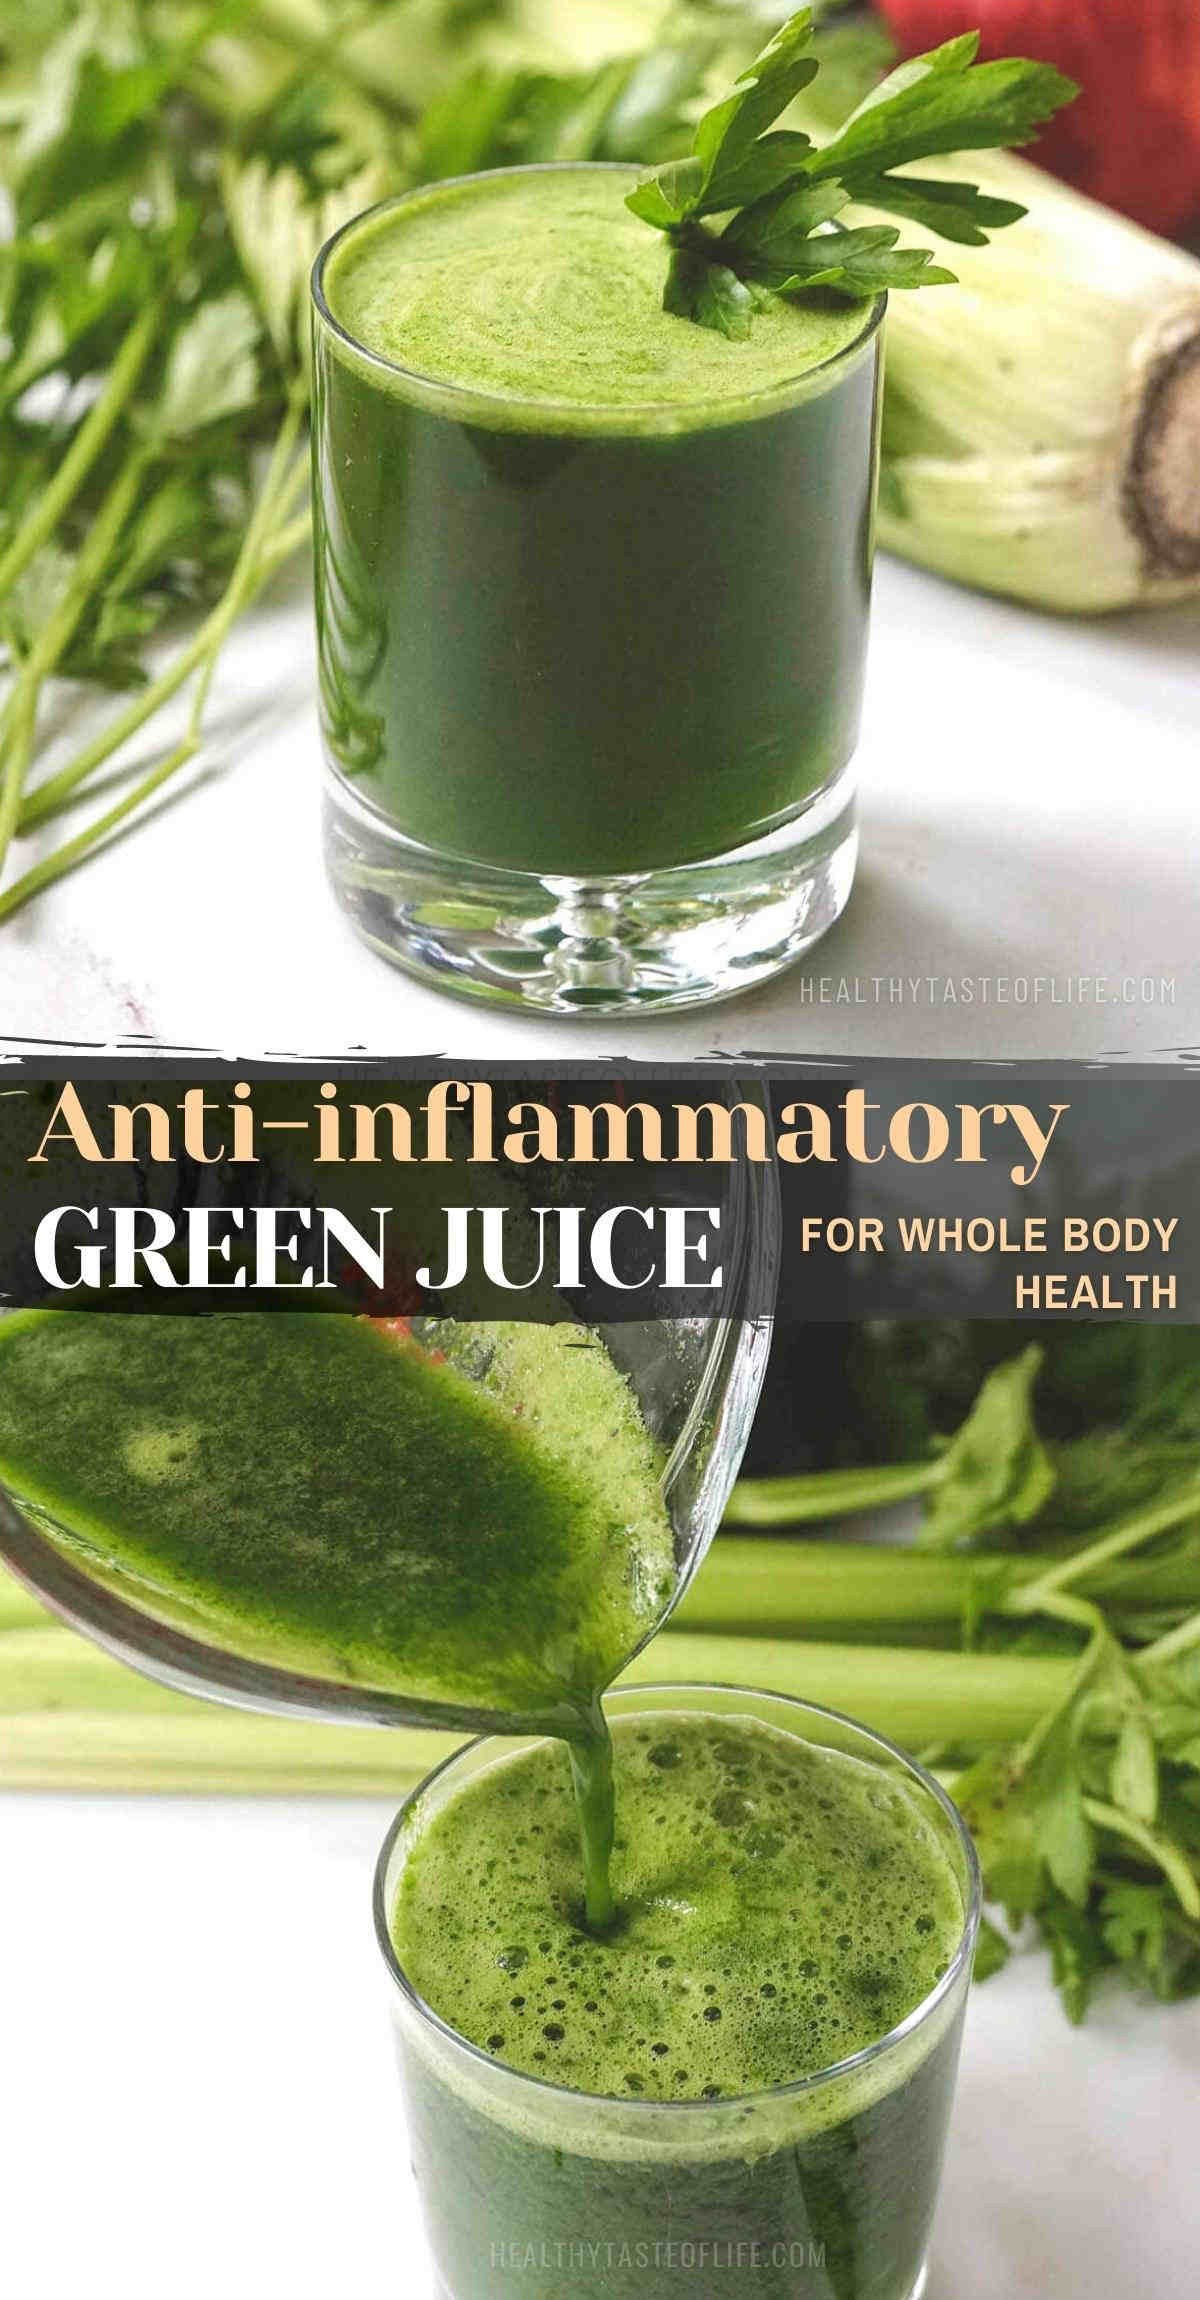 A super anti-inflammatory juice recipe loaded with inflammation-fighting ingredients like celery, collard greens, parsley, and apple. Drinking this green juice for inflammation will help regulate inflammatory symptoms, increase antioxidant and vitamin intake while giving your digestive system a rest. #inflammationjuice #antiinflammatoryjuice #recipe #juiceforinflammation #greenjuice